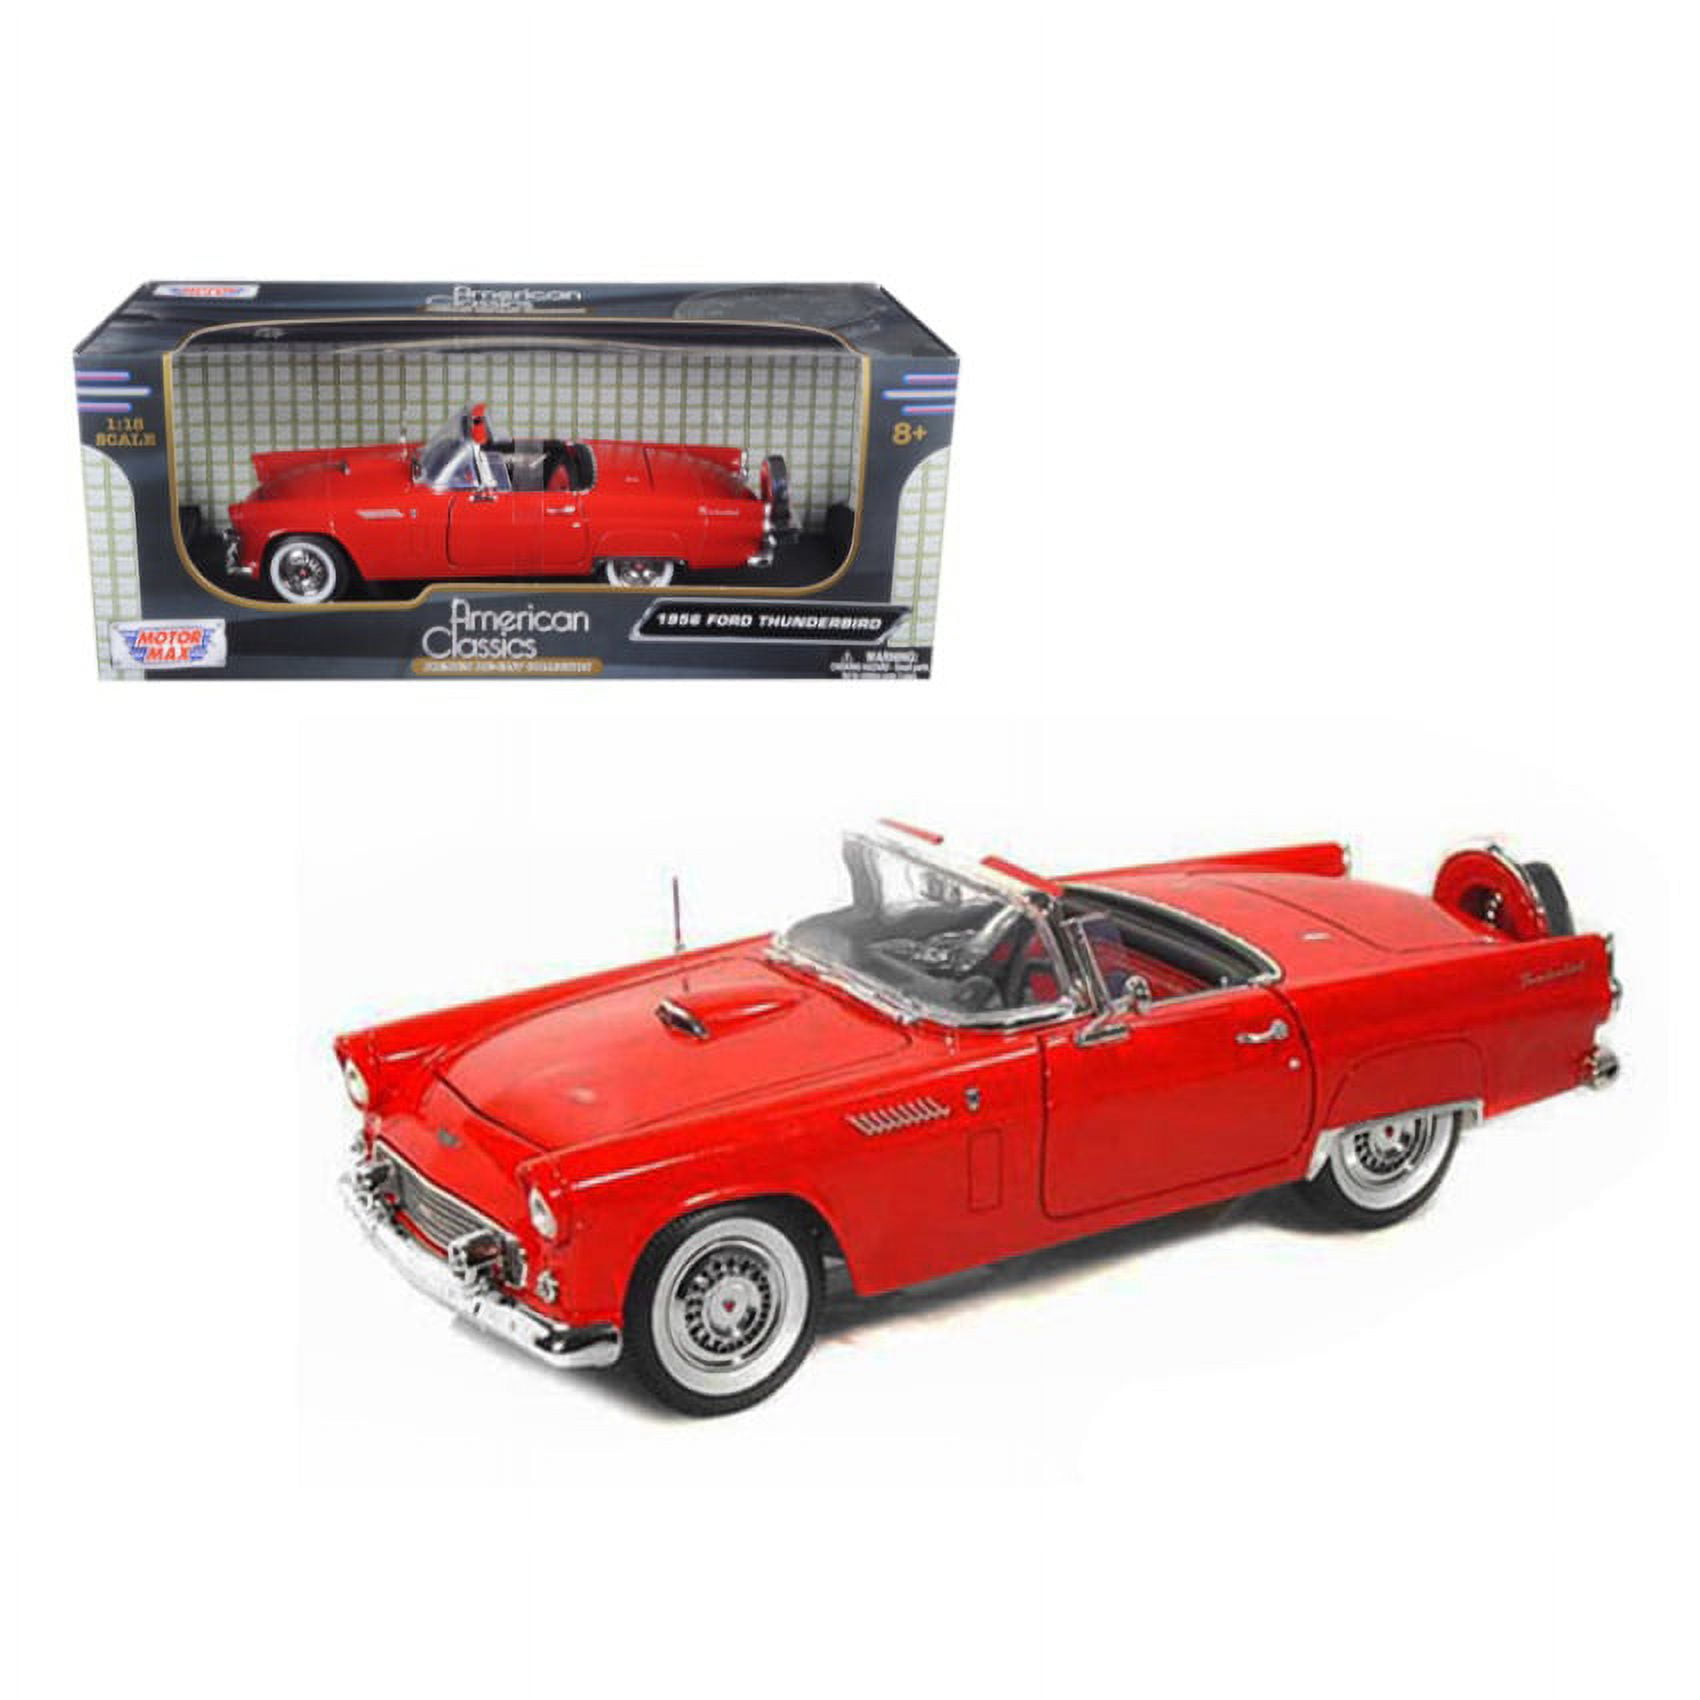 1956 Ford Thunderbird Timeless Classics Diecast Model Car for 1-18 Scale, Black -  Play4Hours, PL63908